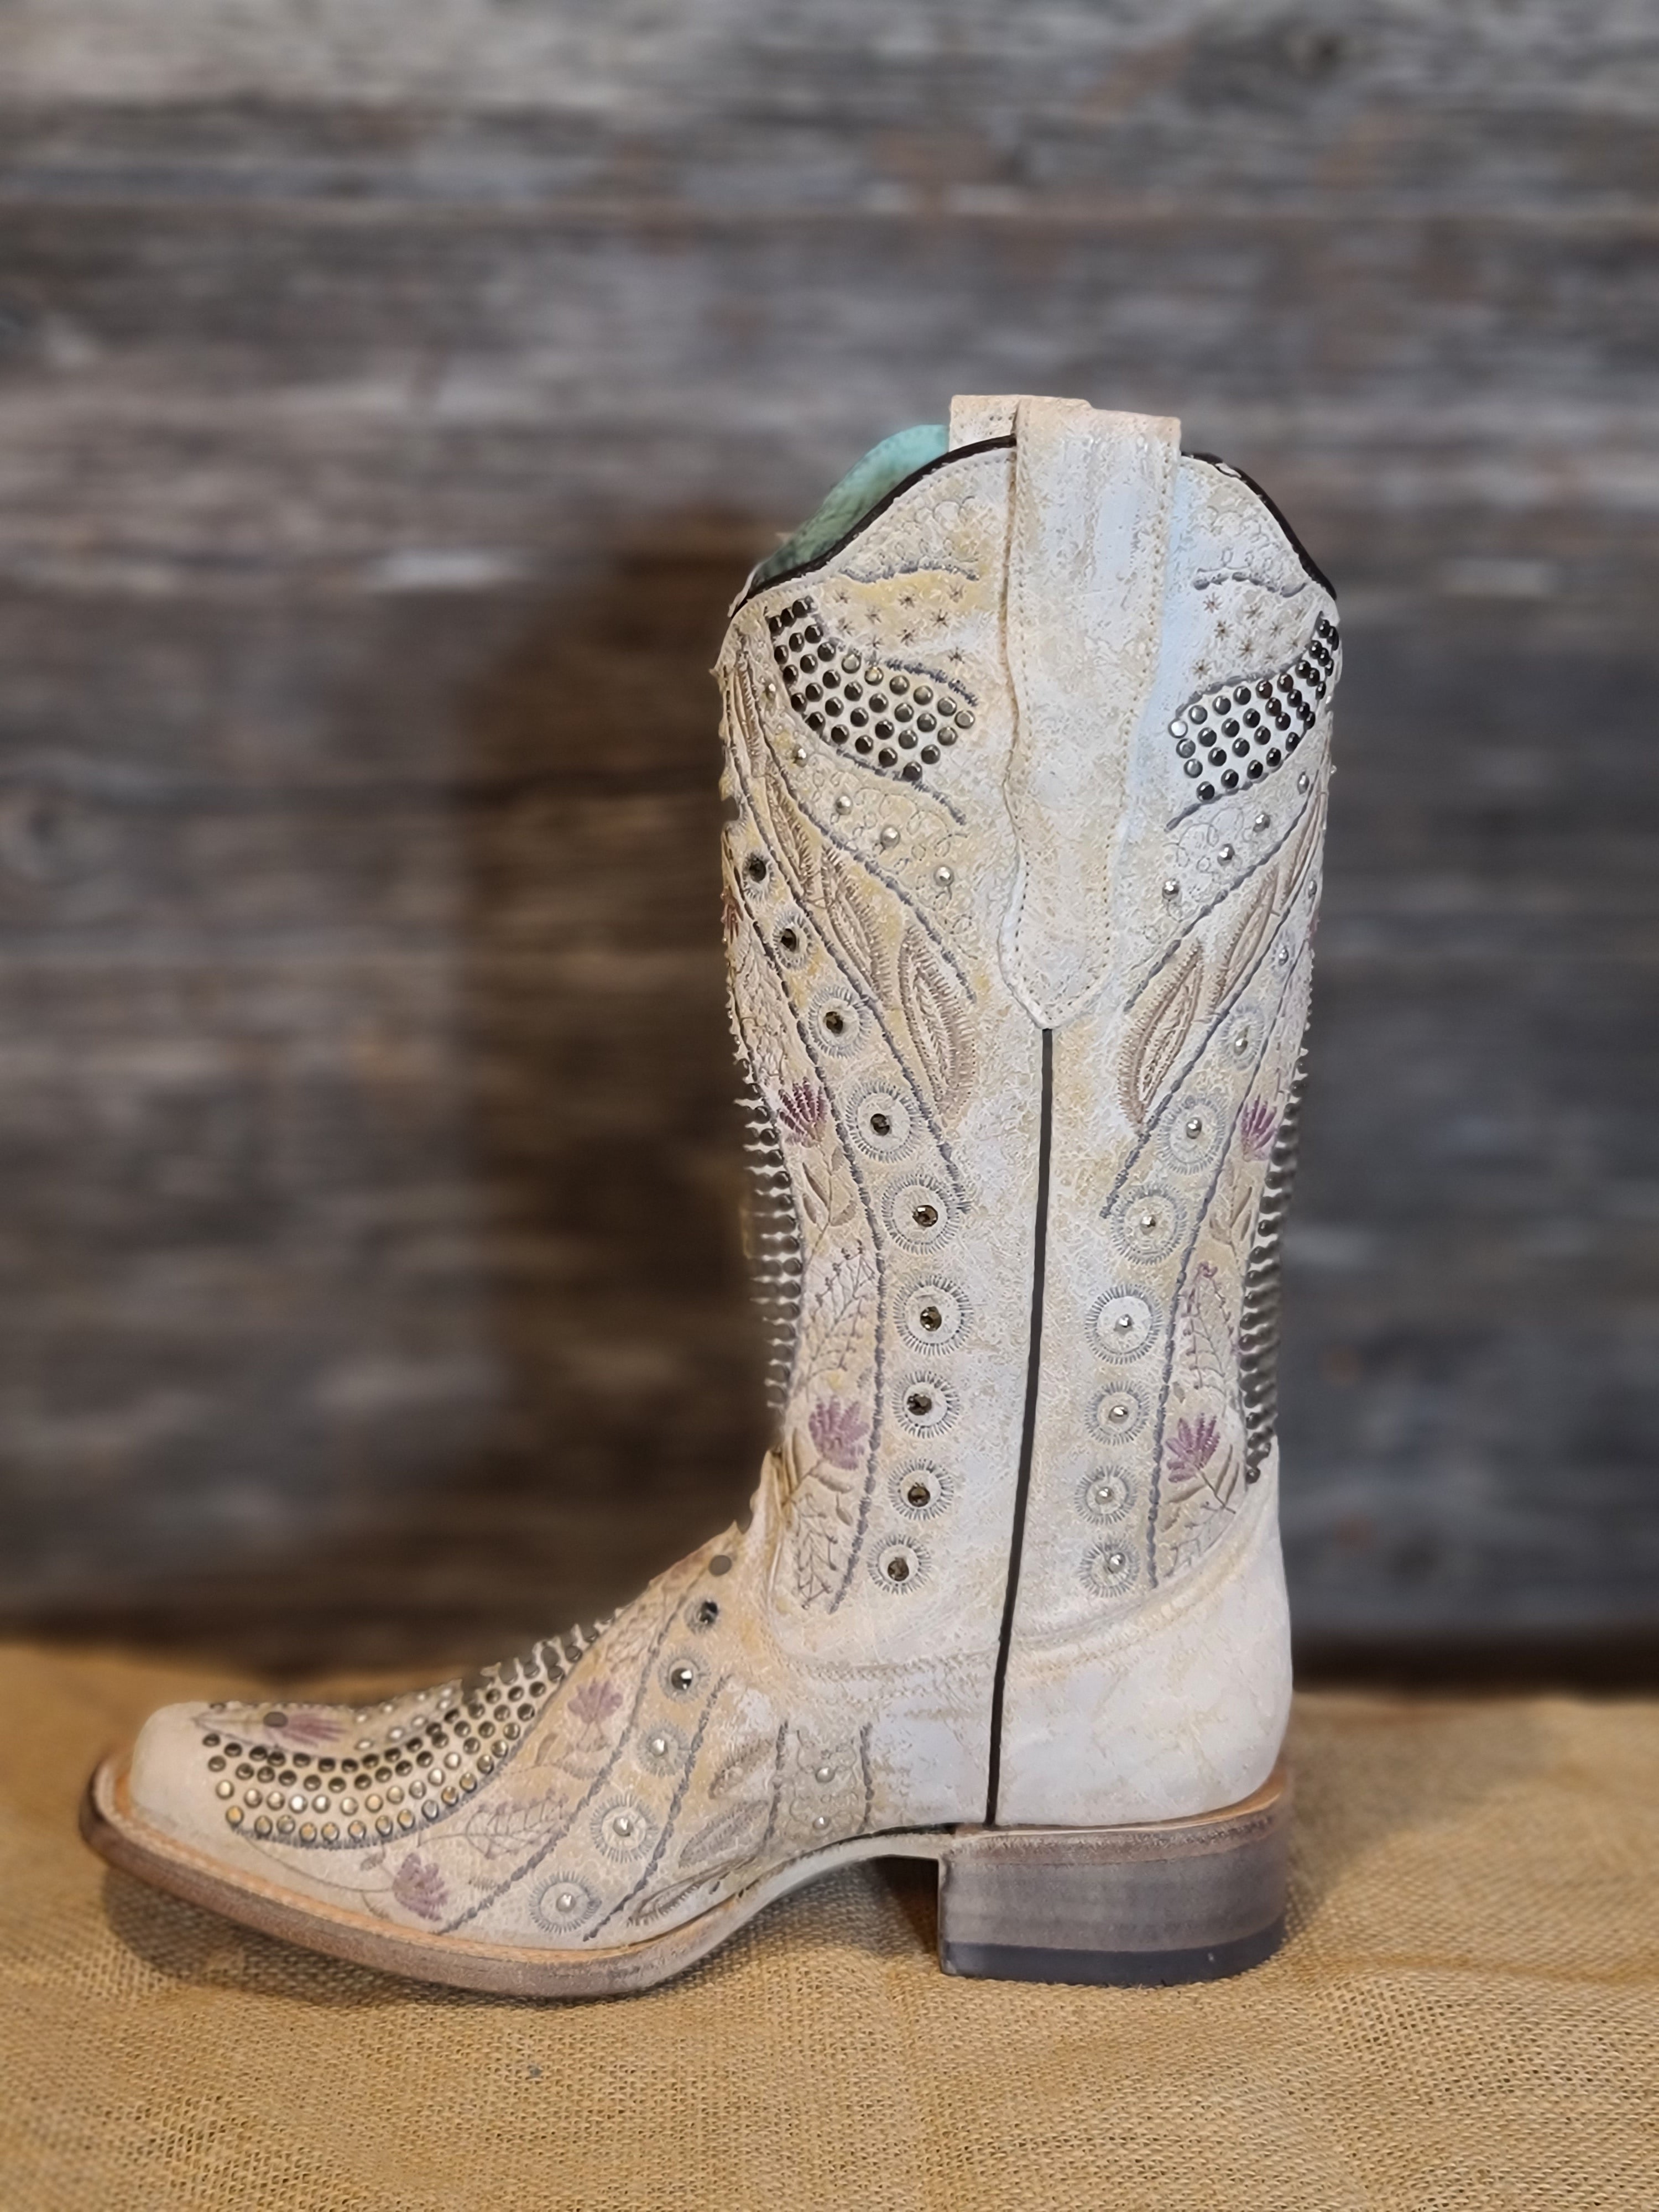 Corral White Studs & Flowered Embroidery & Crystals Square Toe Boot E1523